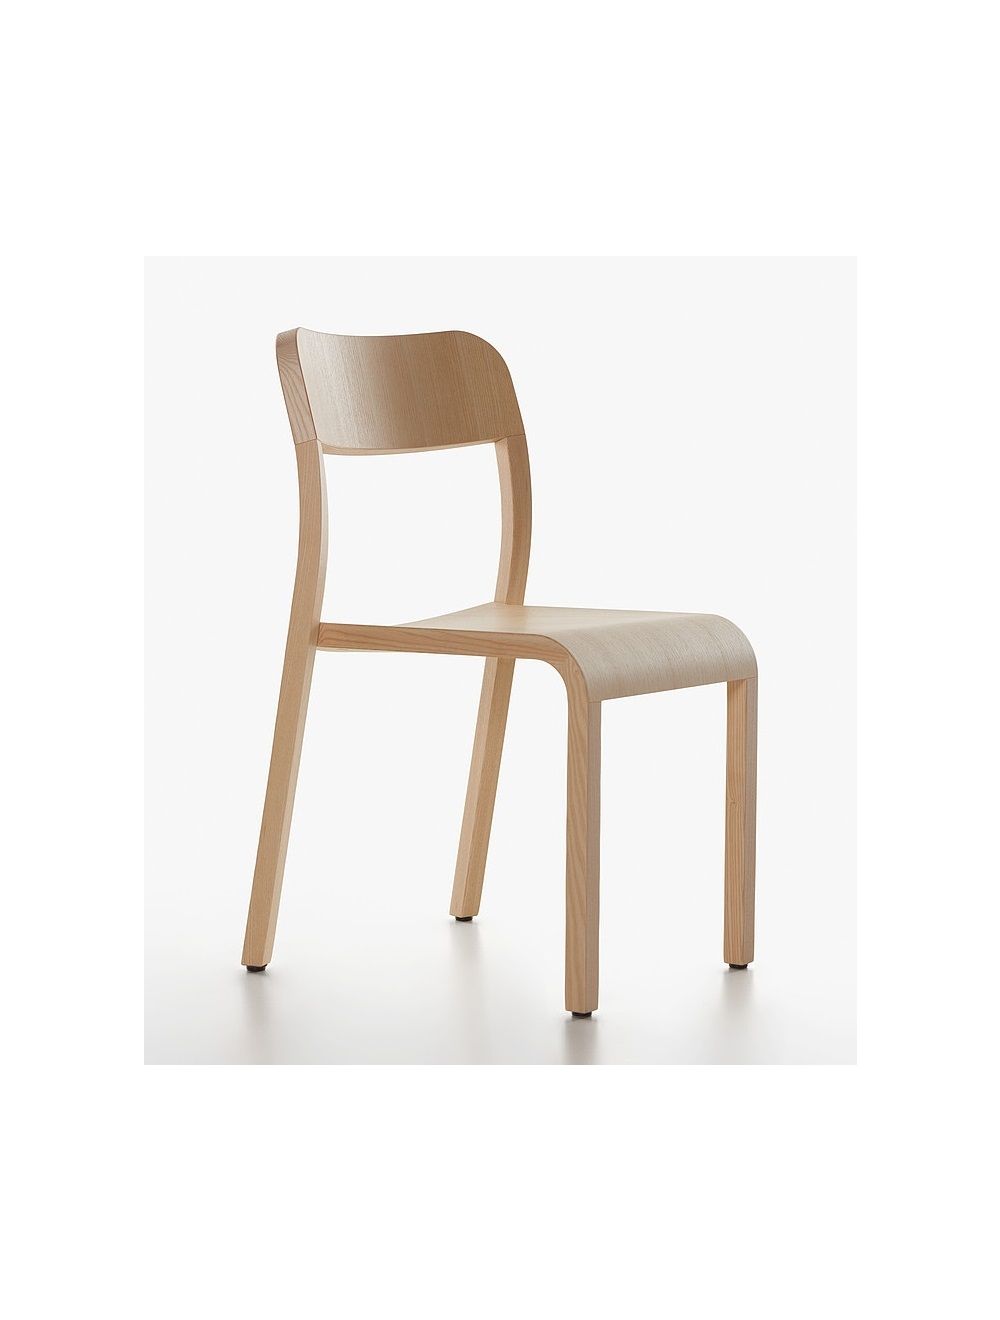 Shop Beechwood Chair Blocco by Plank Online